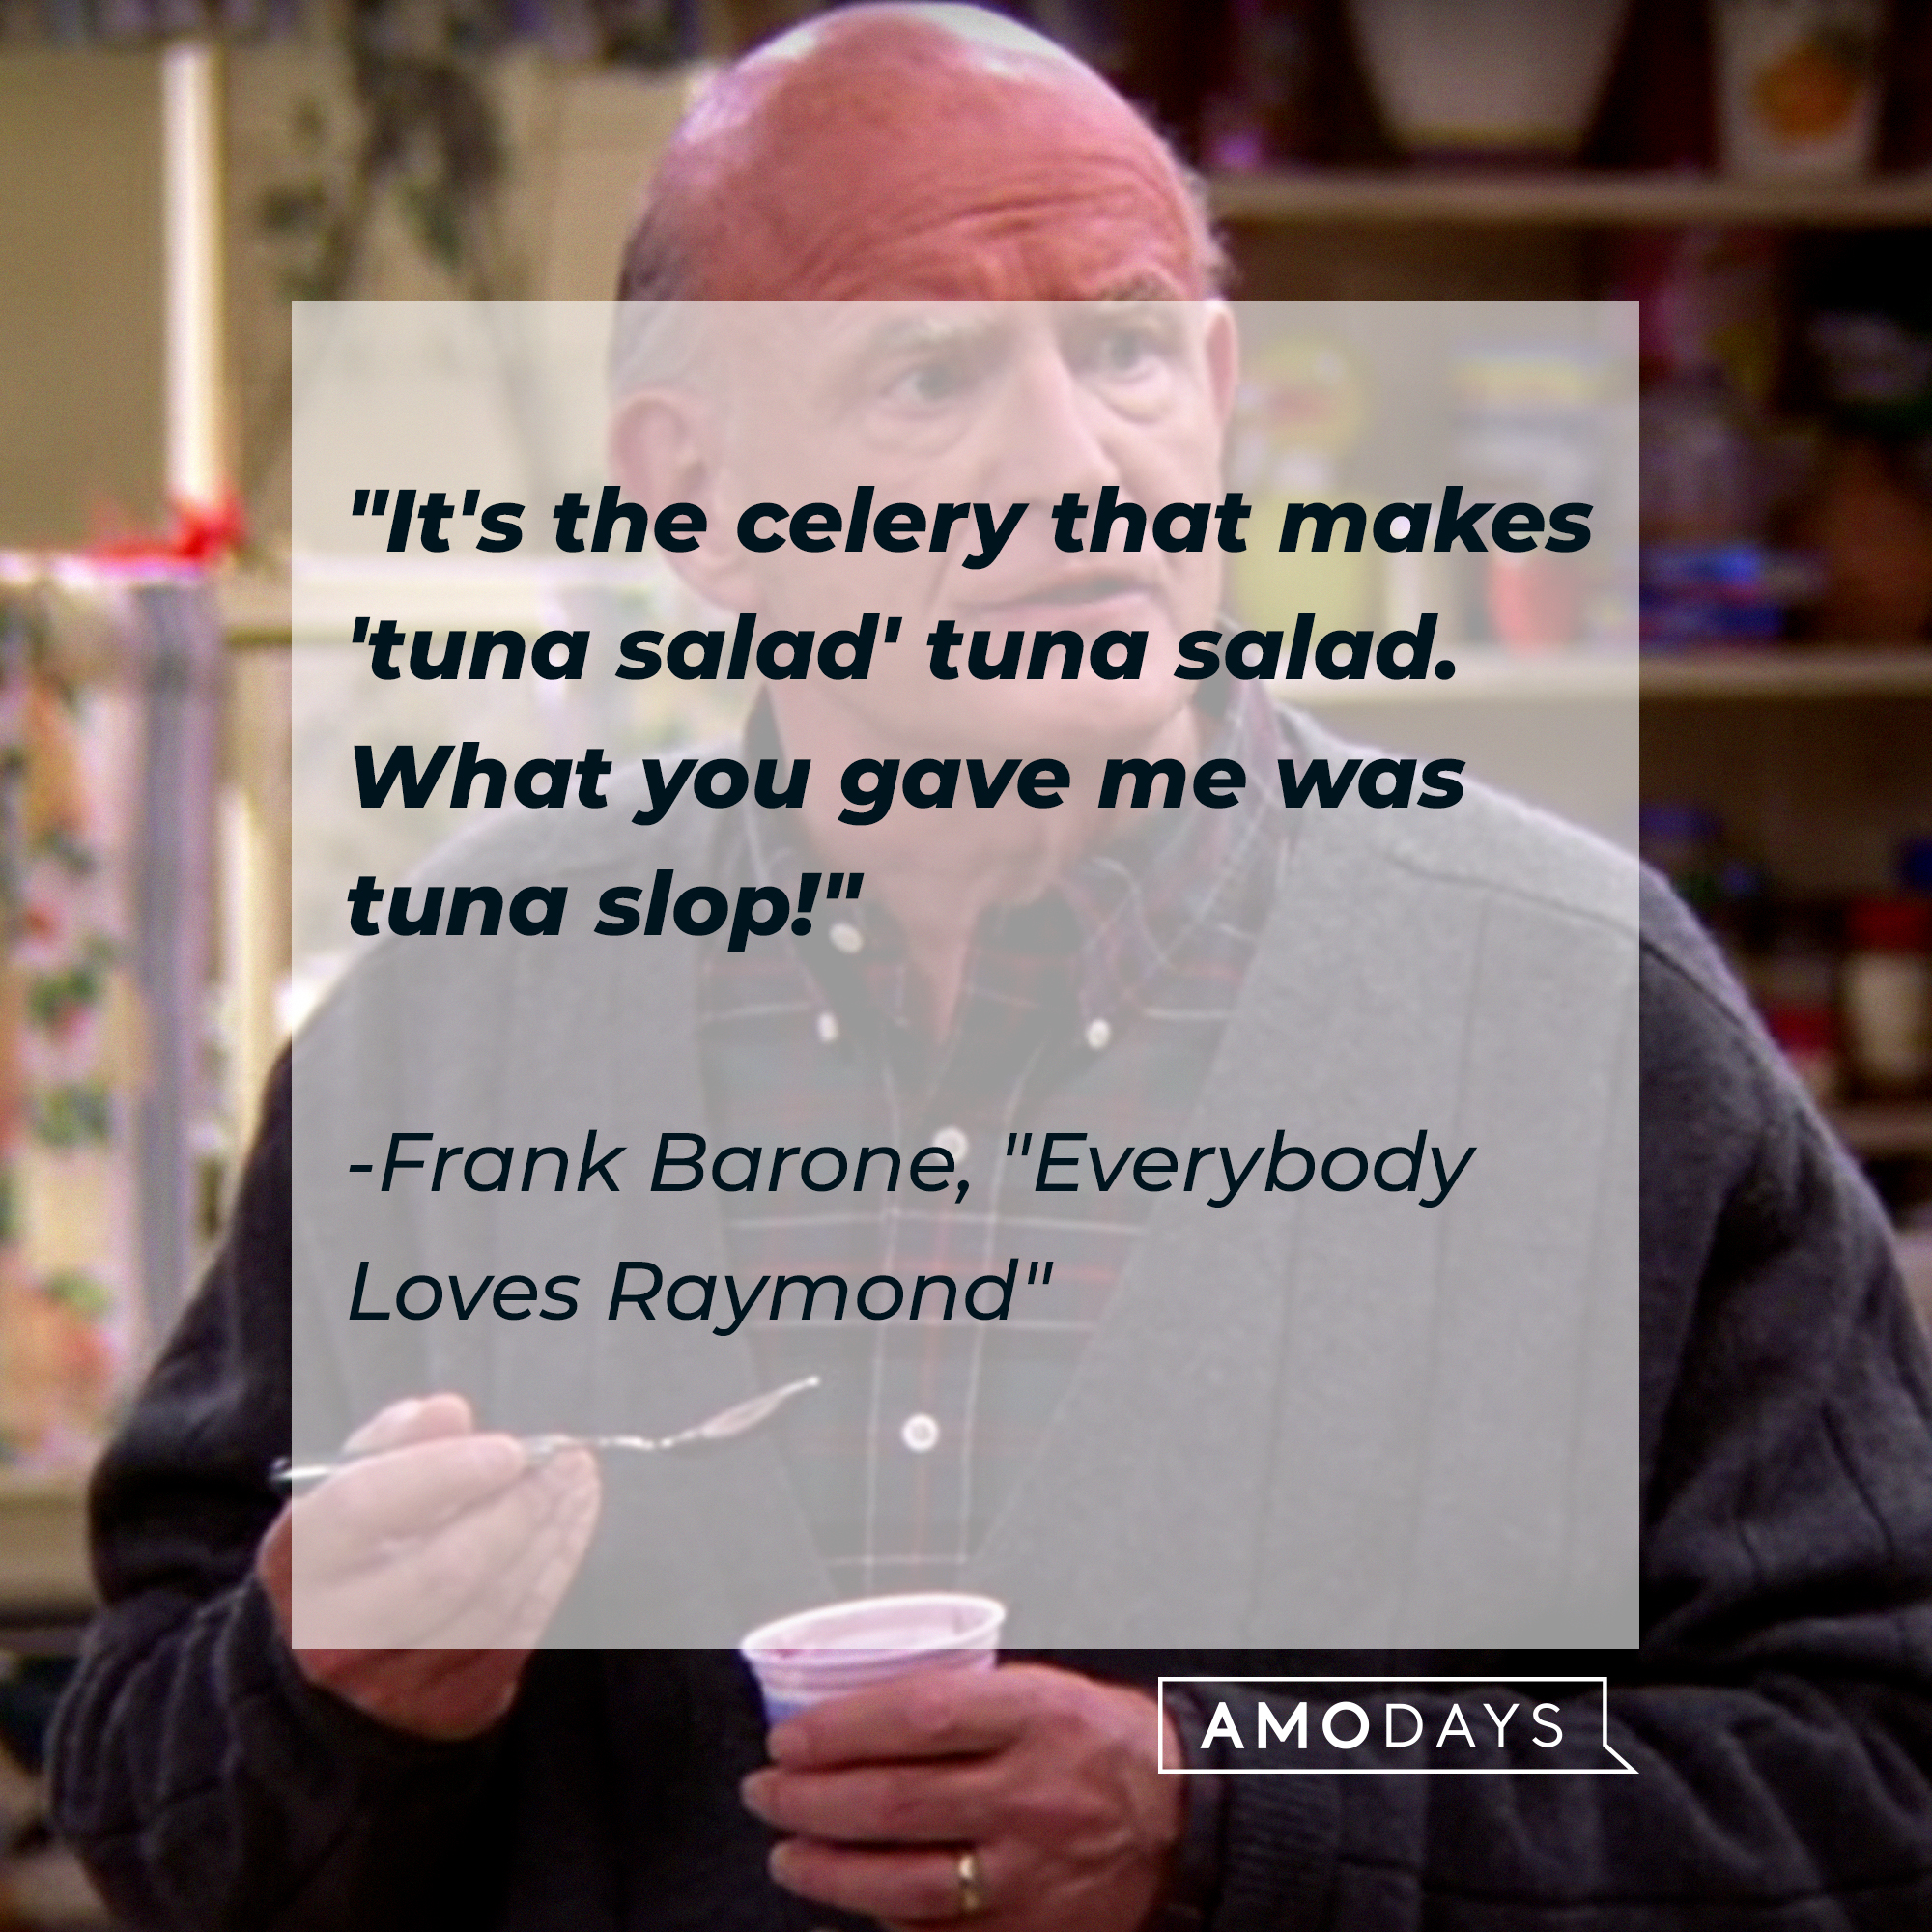 "Everybody Loves Raymond" quote, "It's the celery that makes 'tuna salad' tuna salad. What you gave me was tuna slop!" | Source: Facebook/EverybodyLovesRaymondTVShow